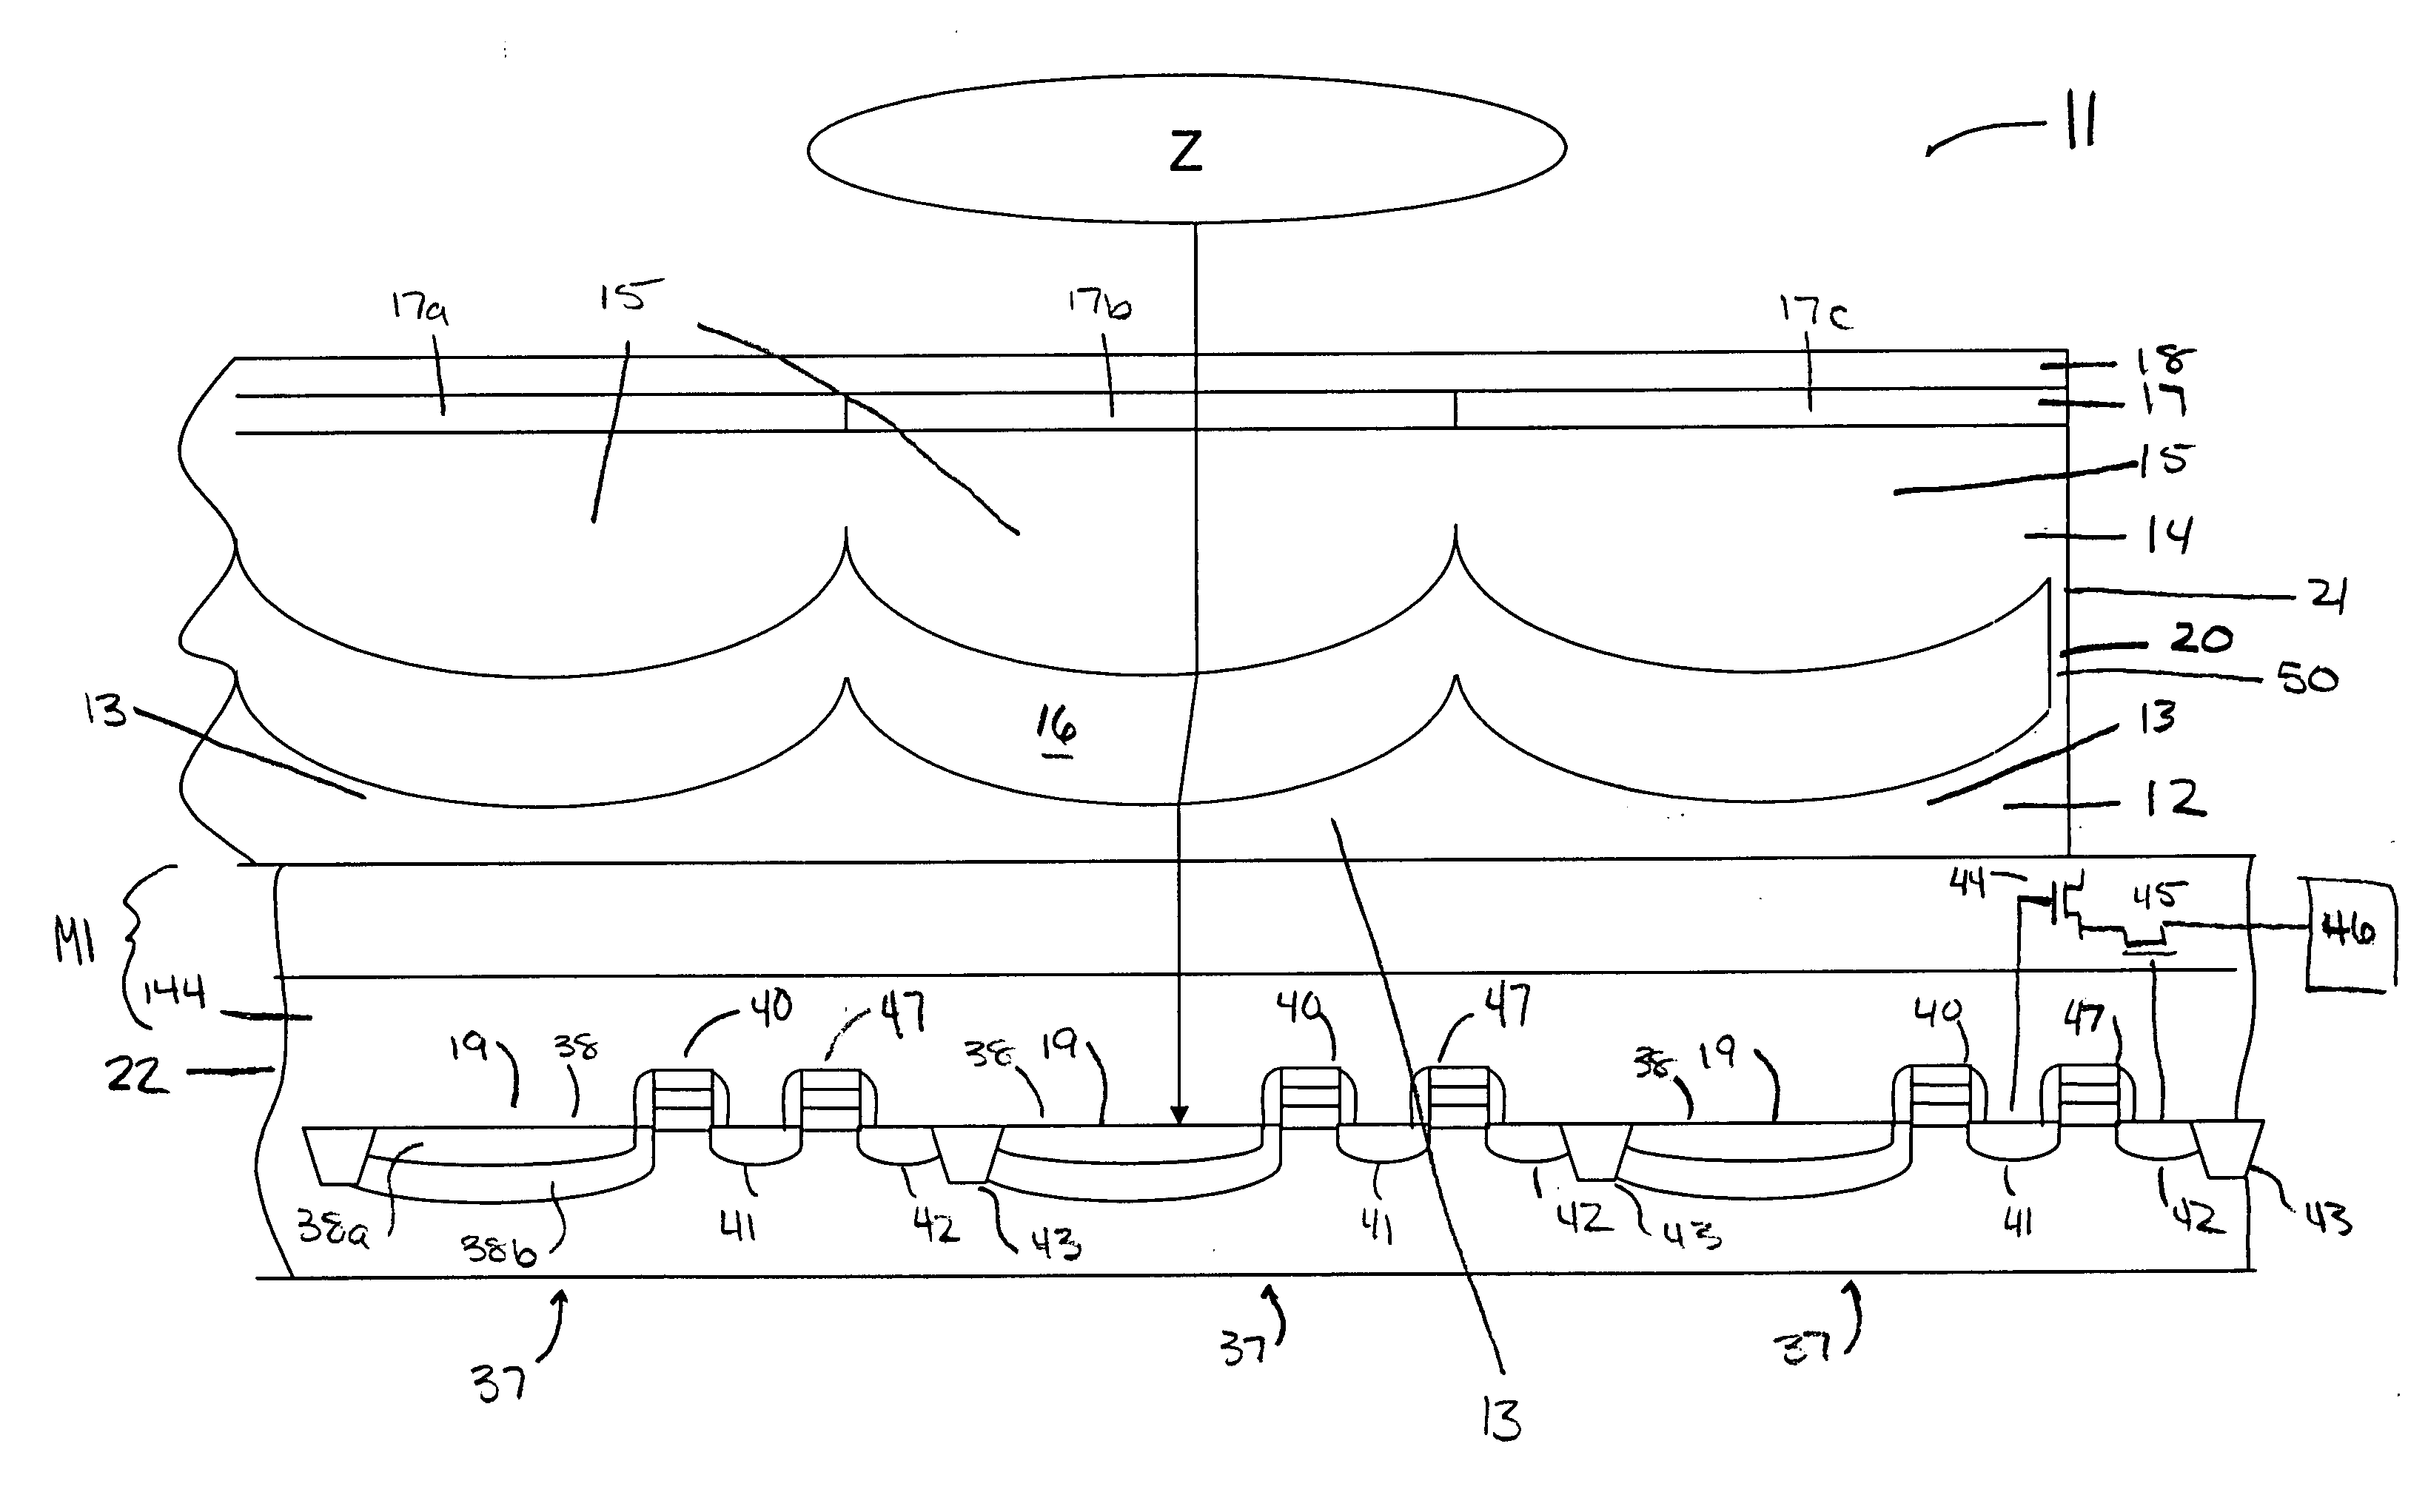 Micro-lens configuration for small lens focusing in digital imaging devices